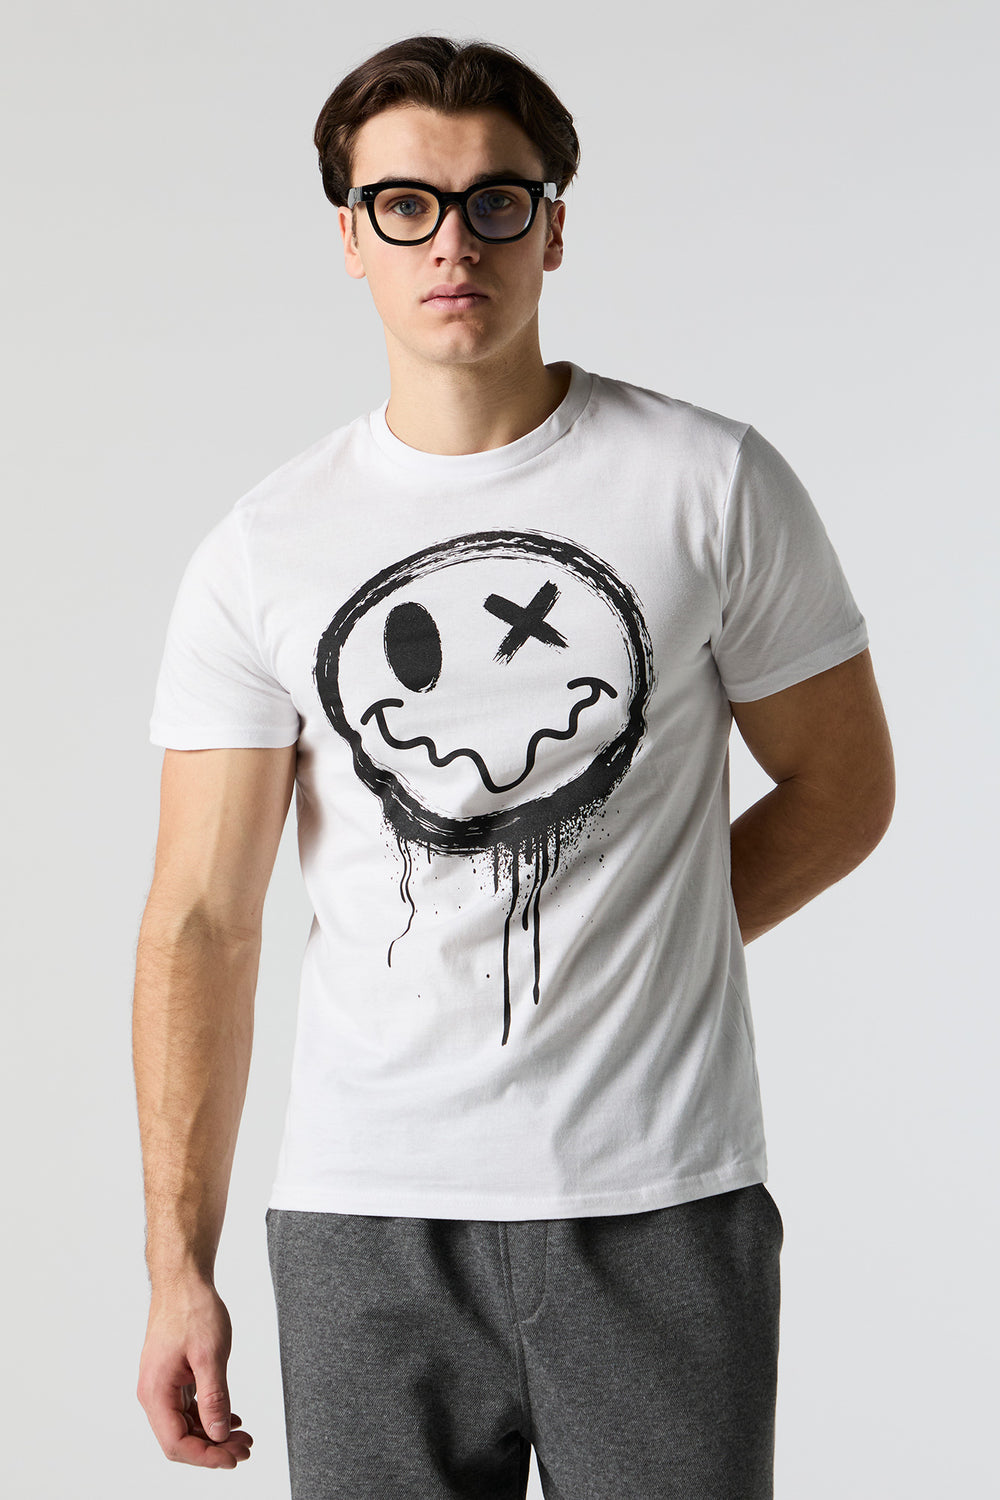 Distorted Smiley Graphic T-Shirt Distorted Smiley Graphic T-Shirt 2